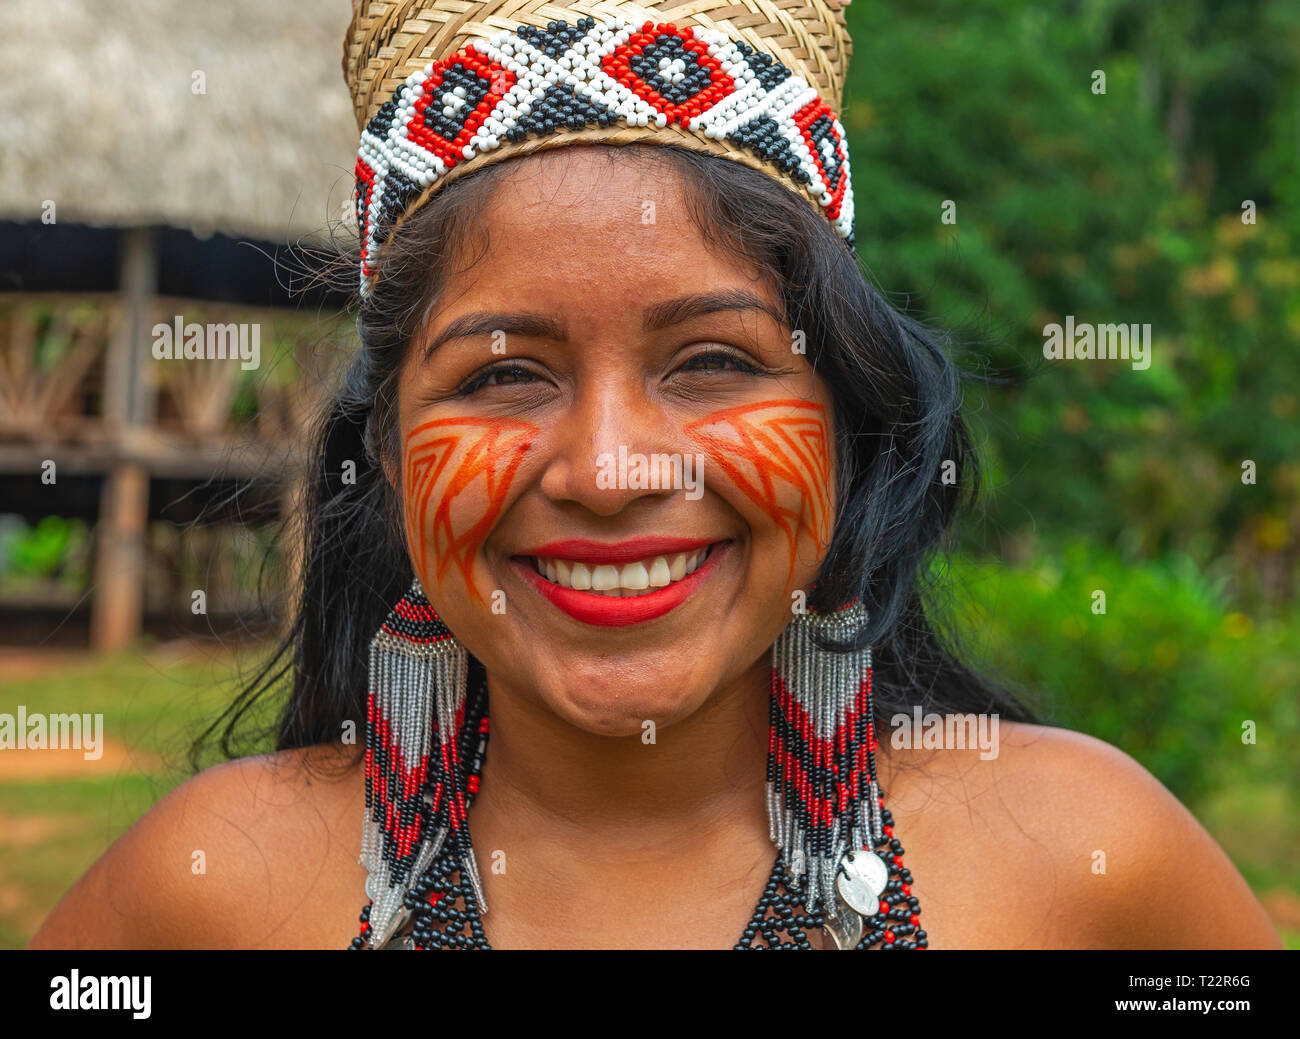 Portrait of a smiling indigenous Embera woman in her village inside the rainforest of Panama, Darien Jungle, Central America. Stock Photo